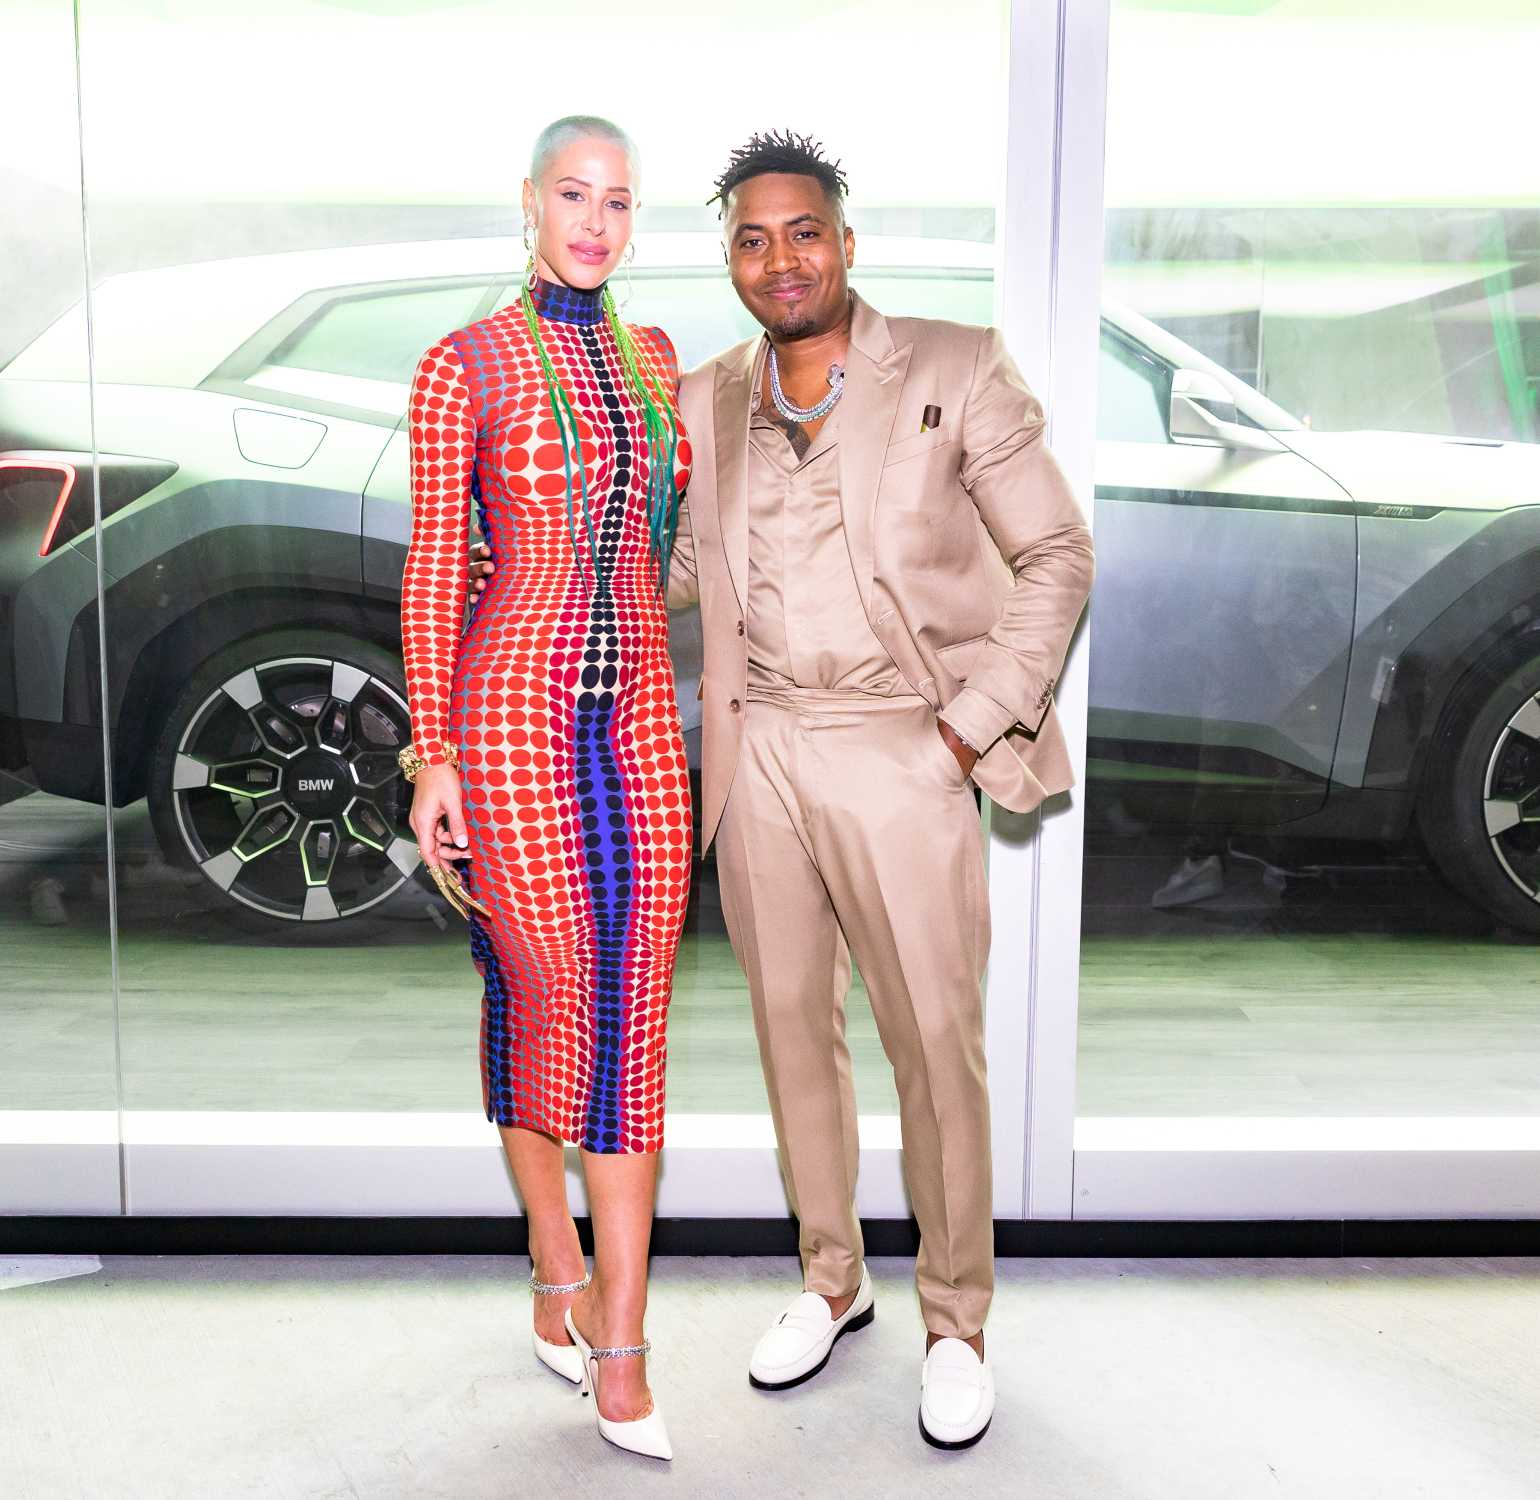 BMW is official partner of Art Basel in Miami Beach: Kennedy Yanko (artist)  together with NAS (rapper). © BFA (11/2021)